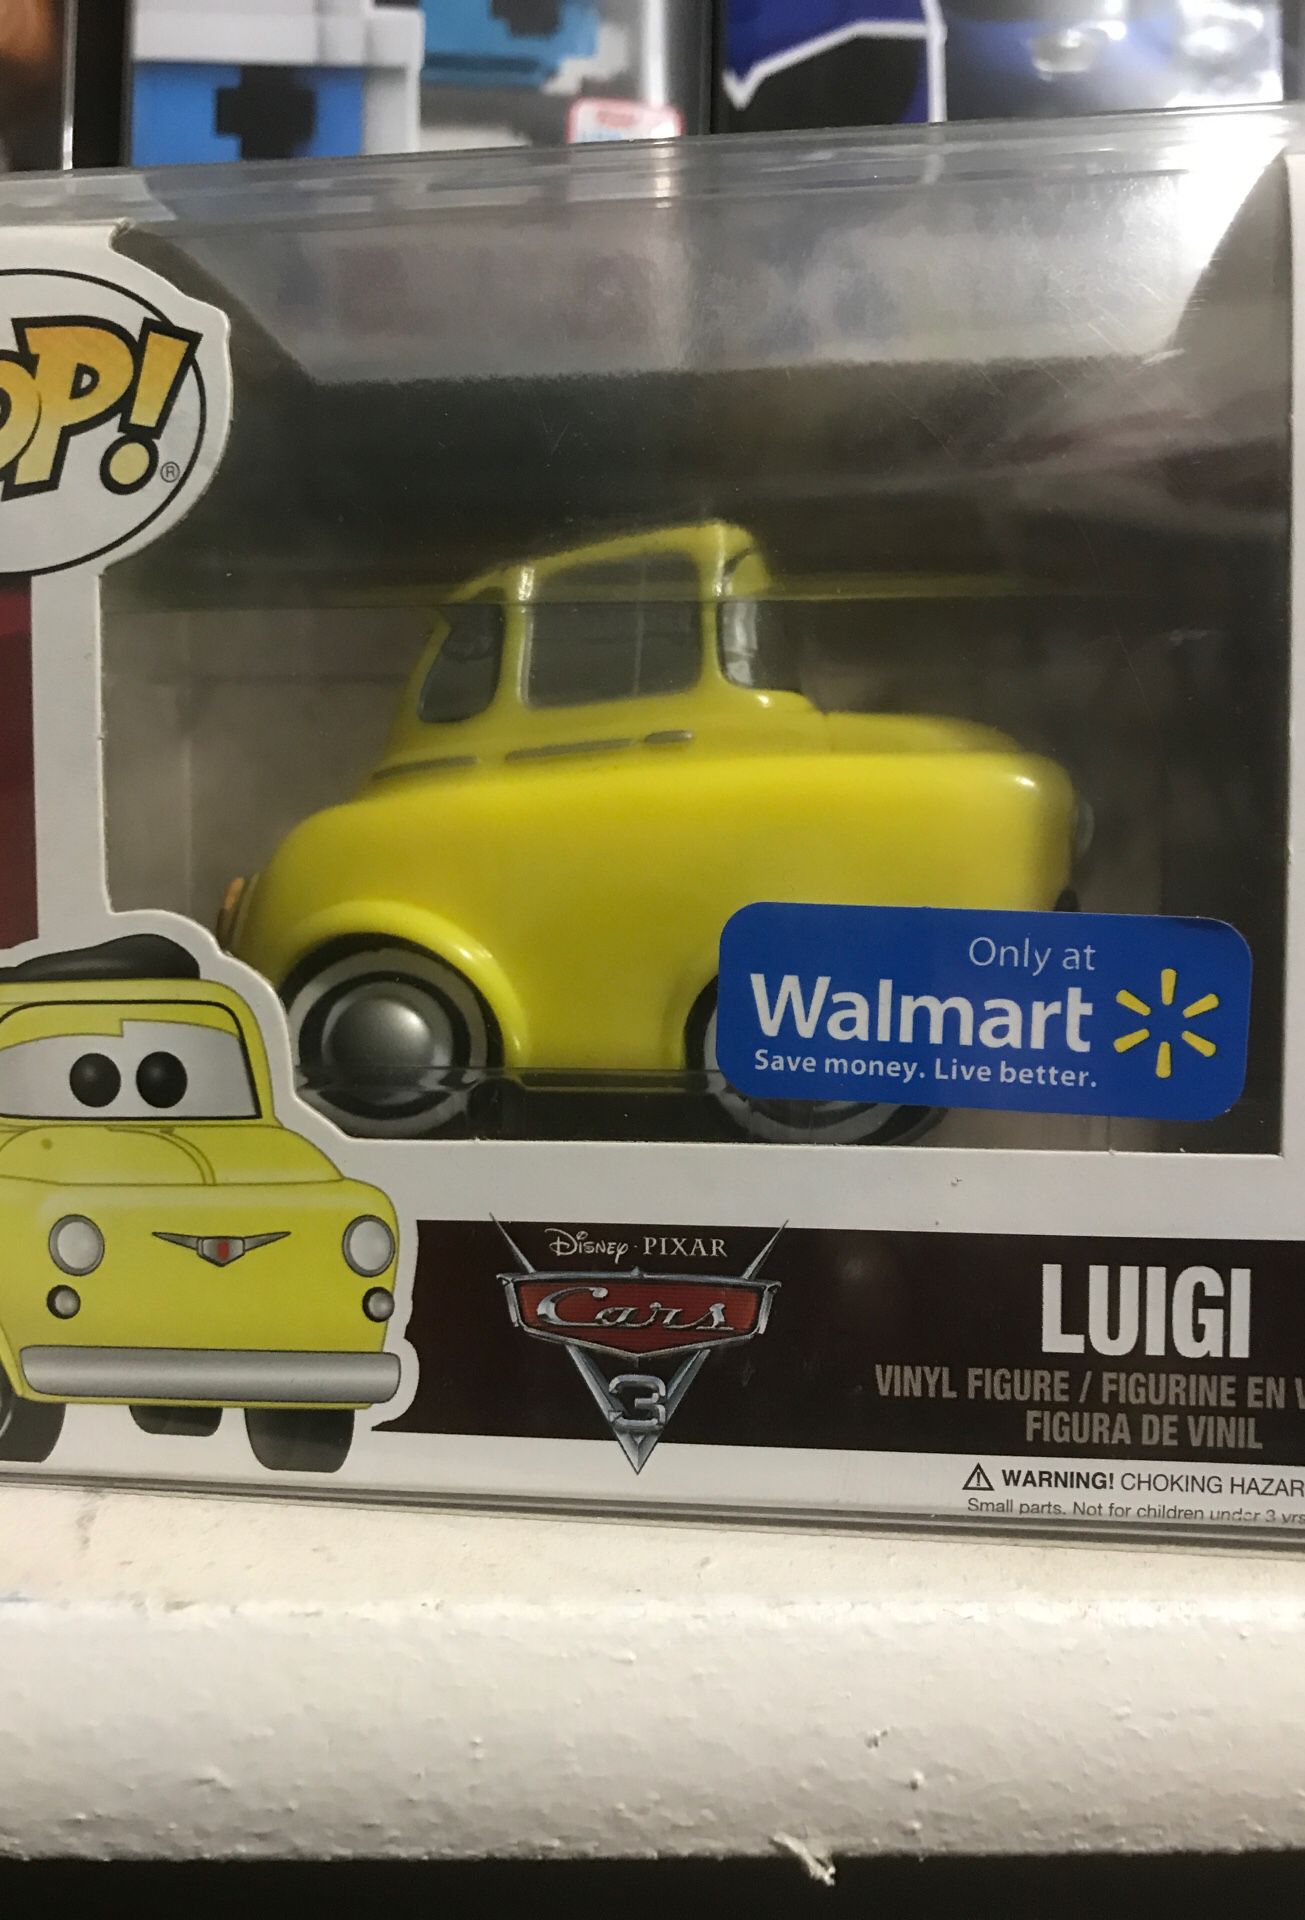 Funko Pop Disney’s Pixar Cars 🚗 Luigi Walmart exclusive. Whilst not paying for expensive cereal